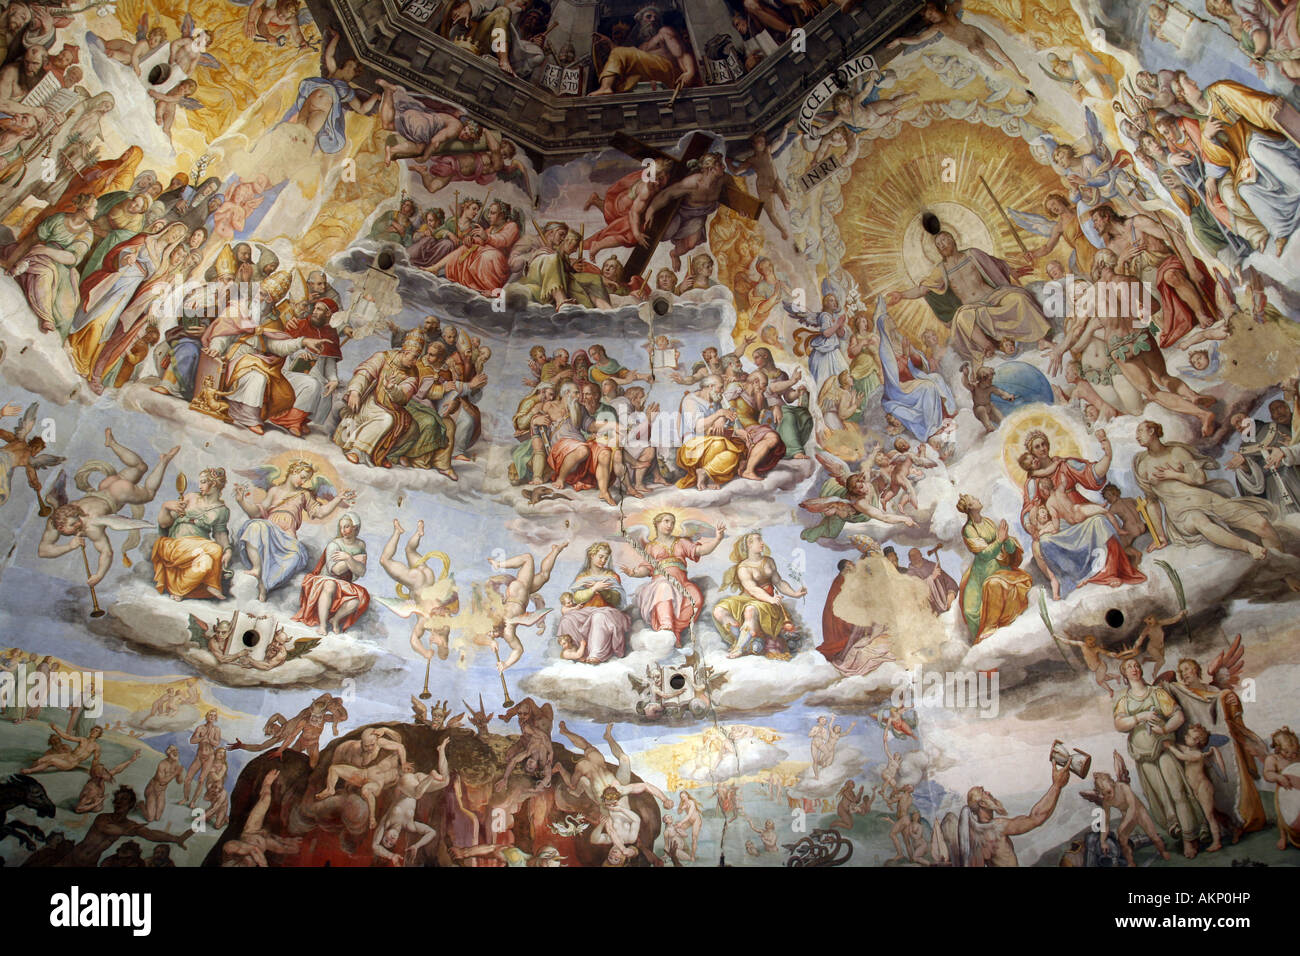 The Last Judgement Painting On The Ceiling Of The Dome The Duomo